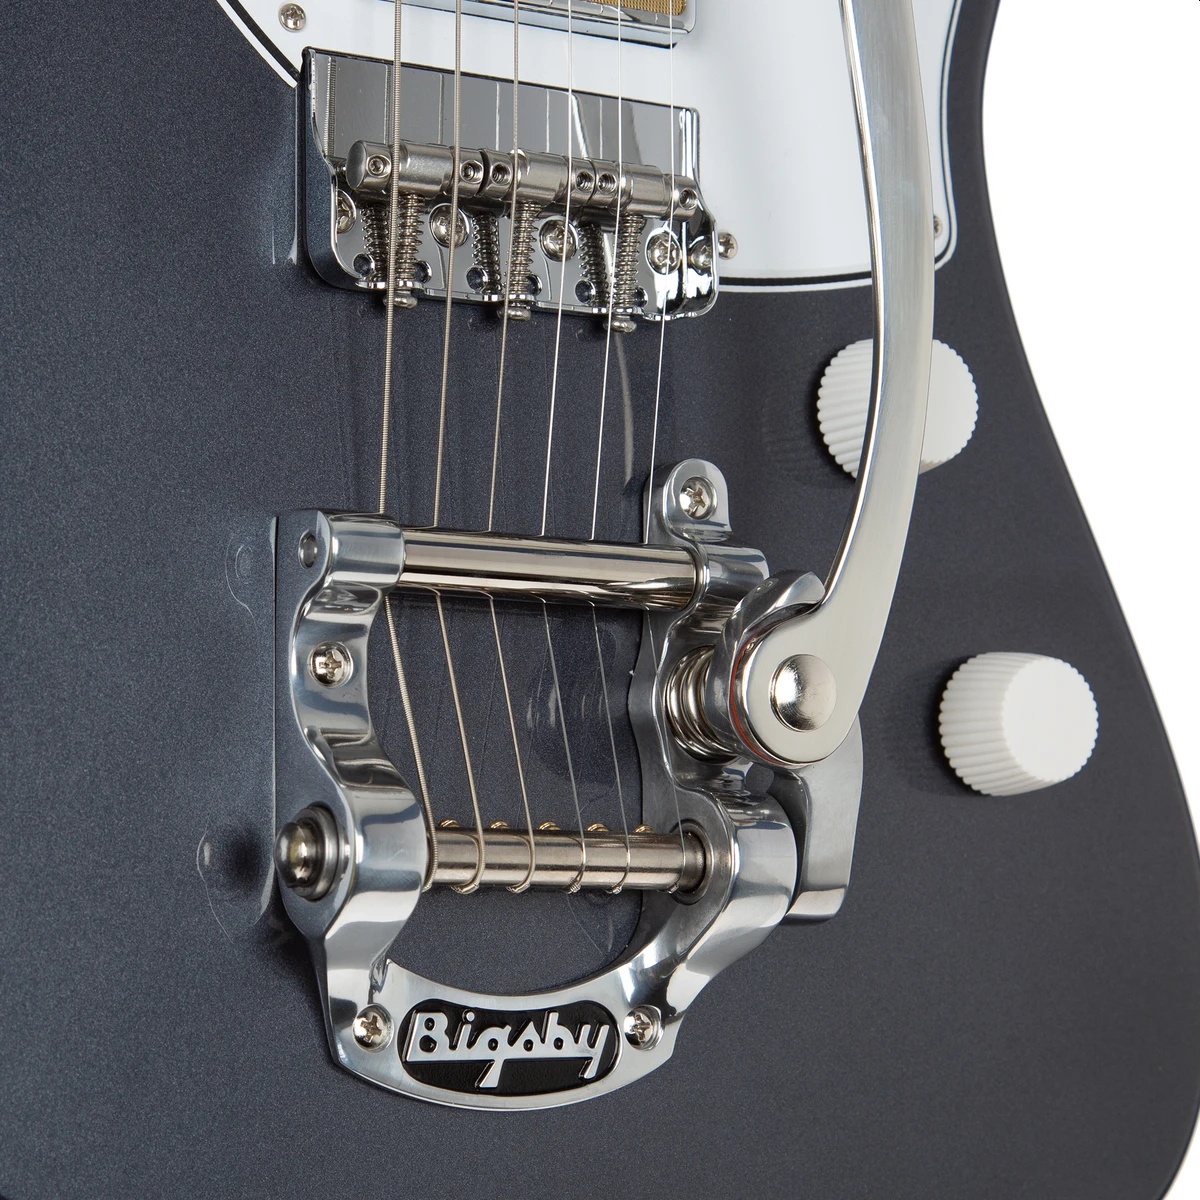 Harmony Silhouette with Bigsby - Slate